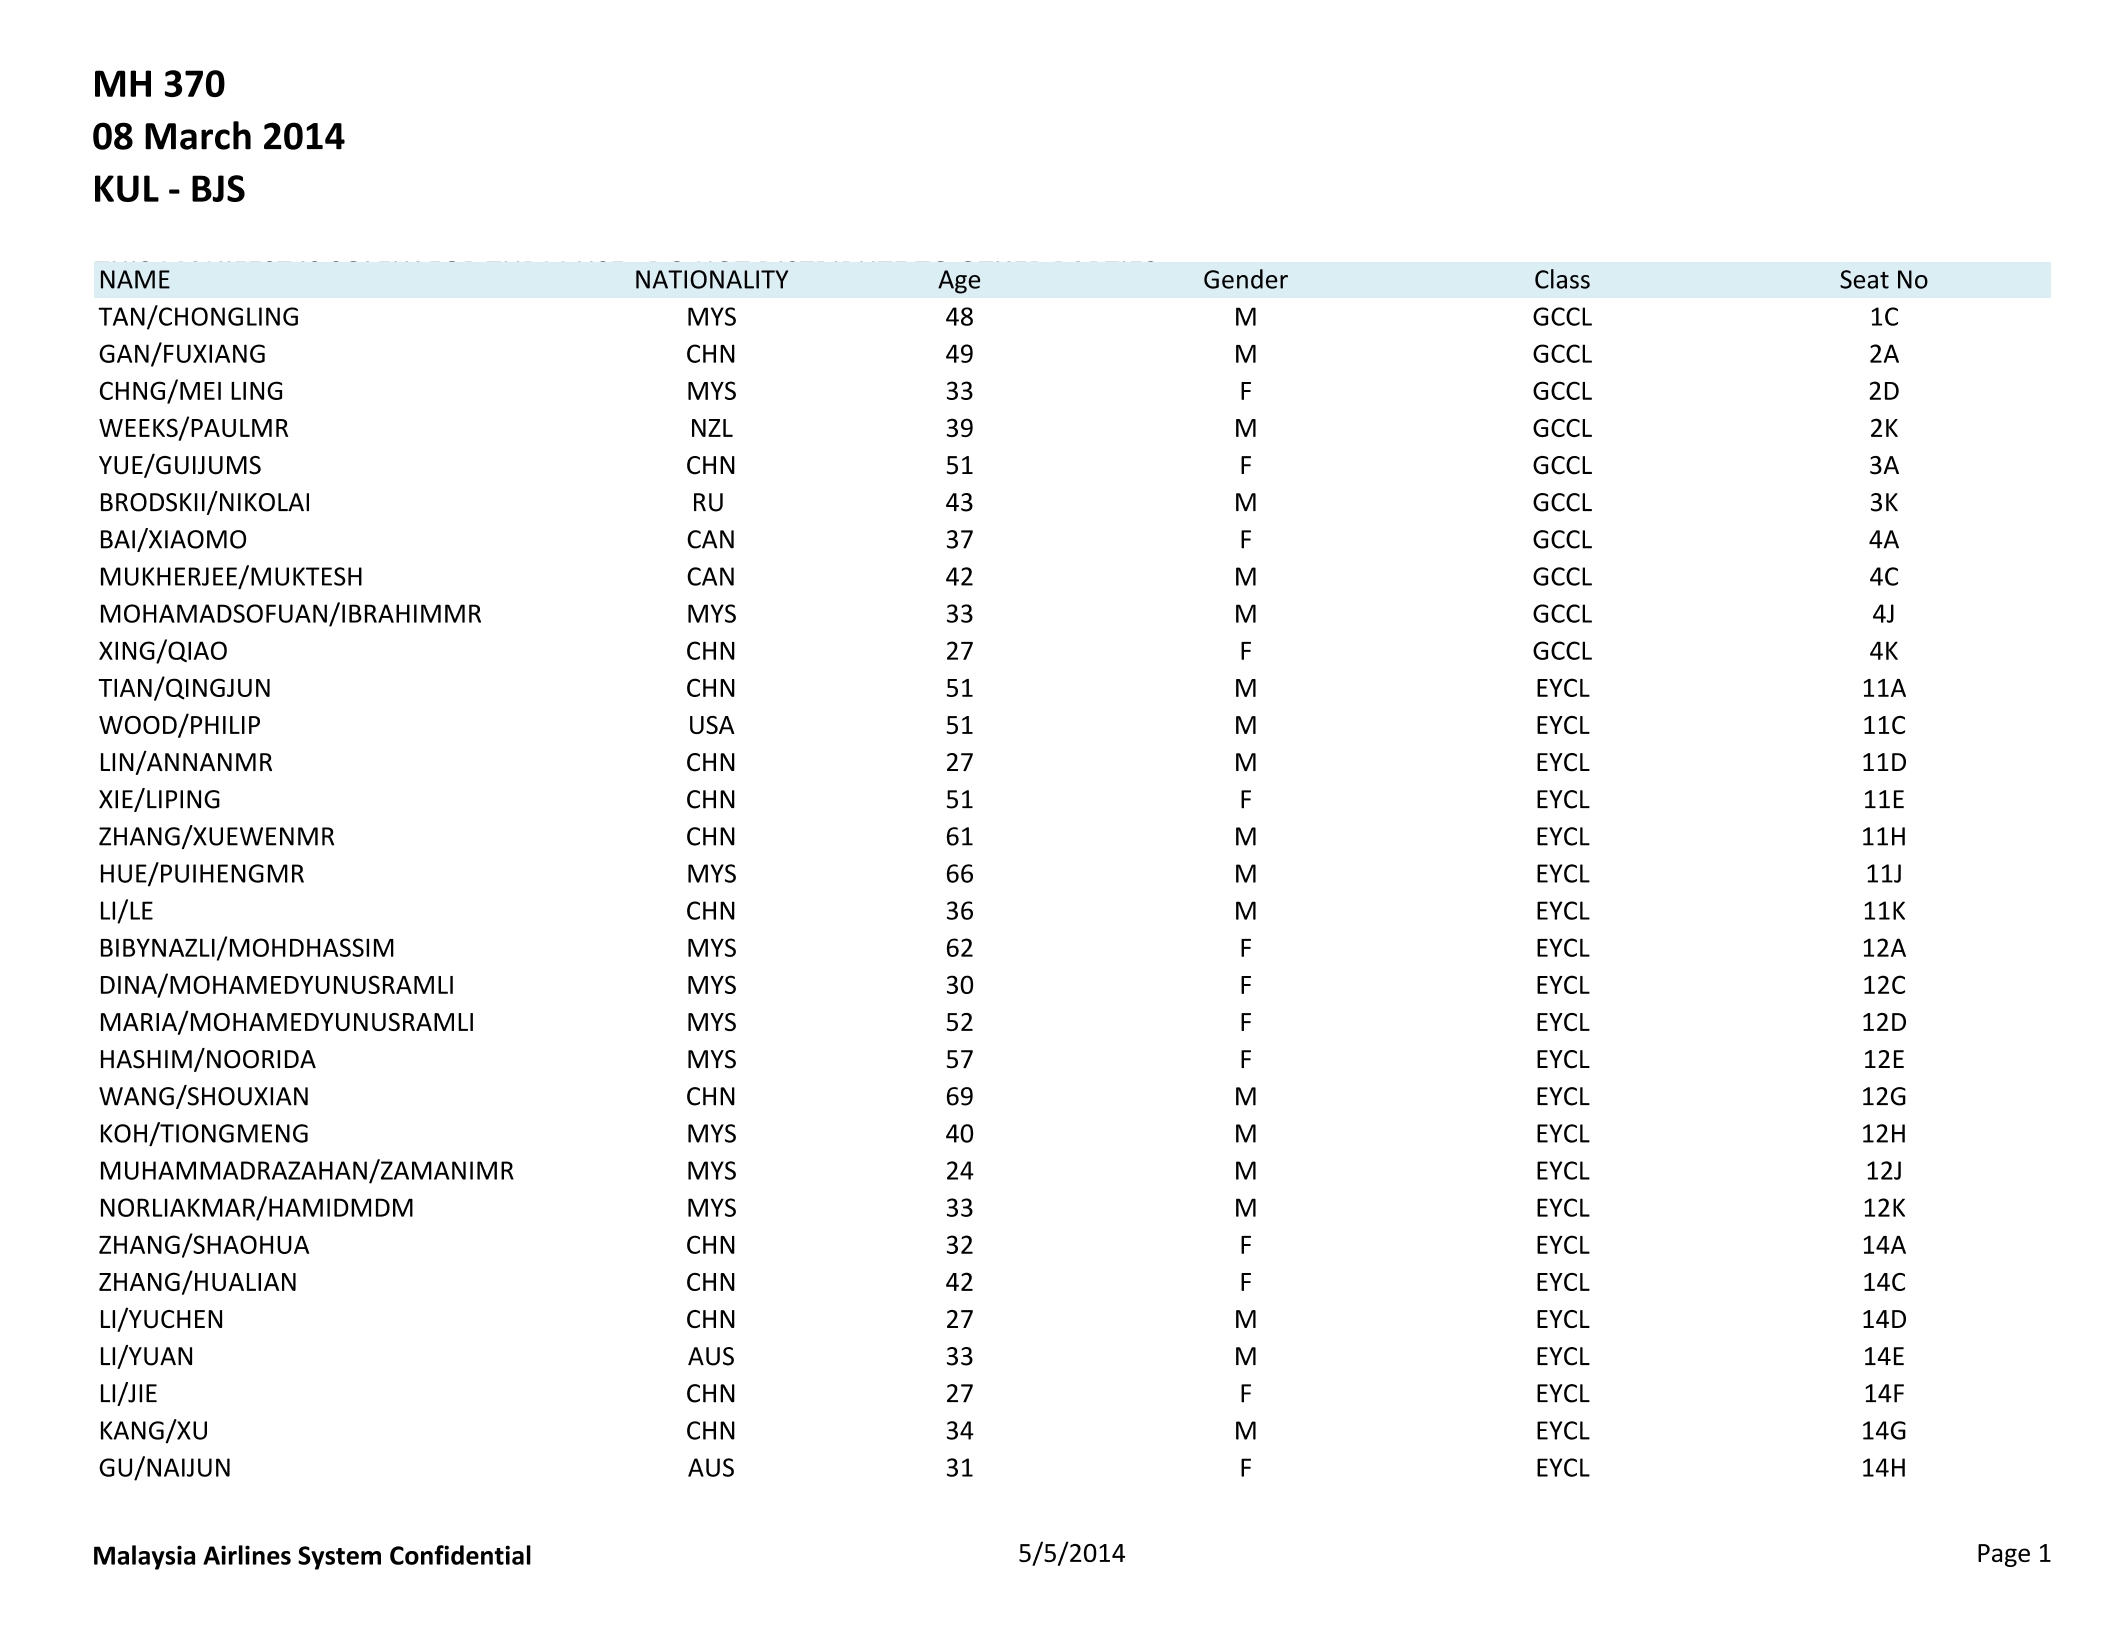 Malaysia Airlines Flight MH370 Passenger Manifest 5 May 2014 Page 1